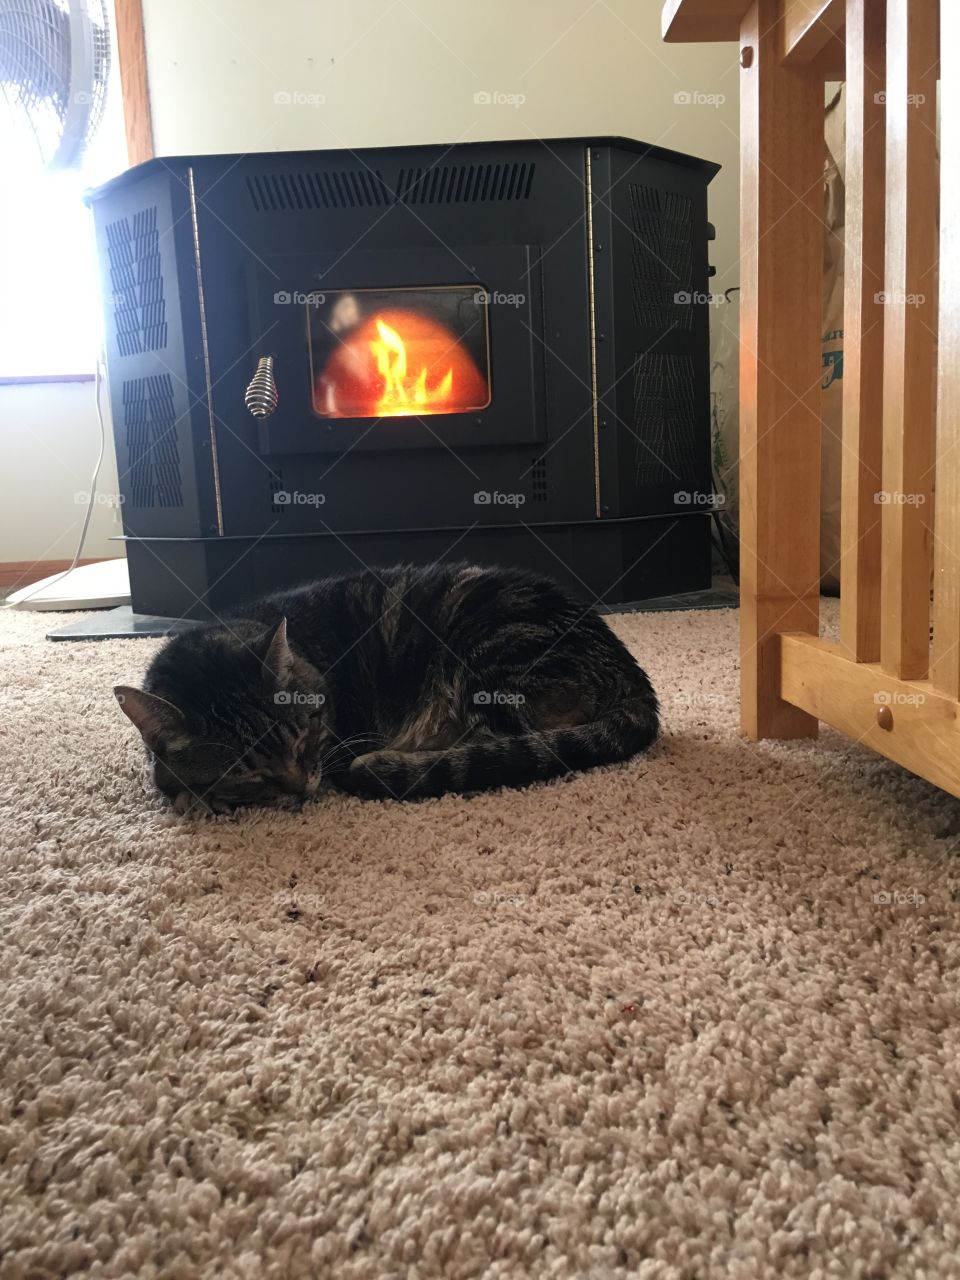 Puss and Boots sleeping by the corn stove 